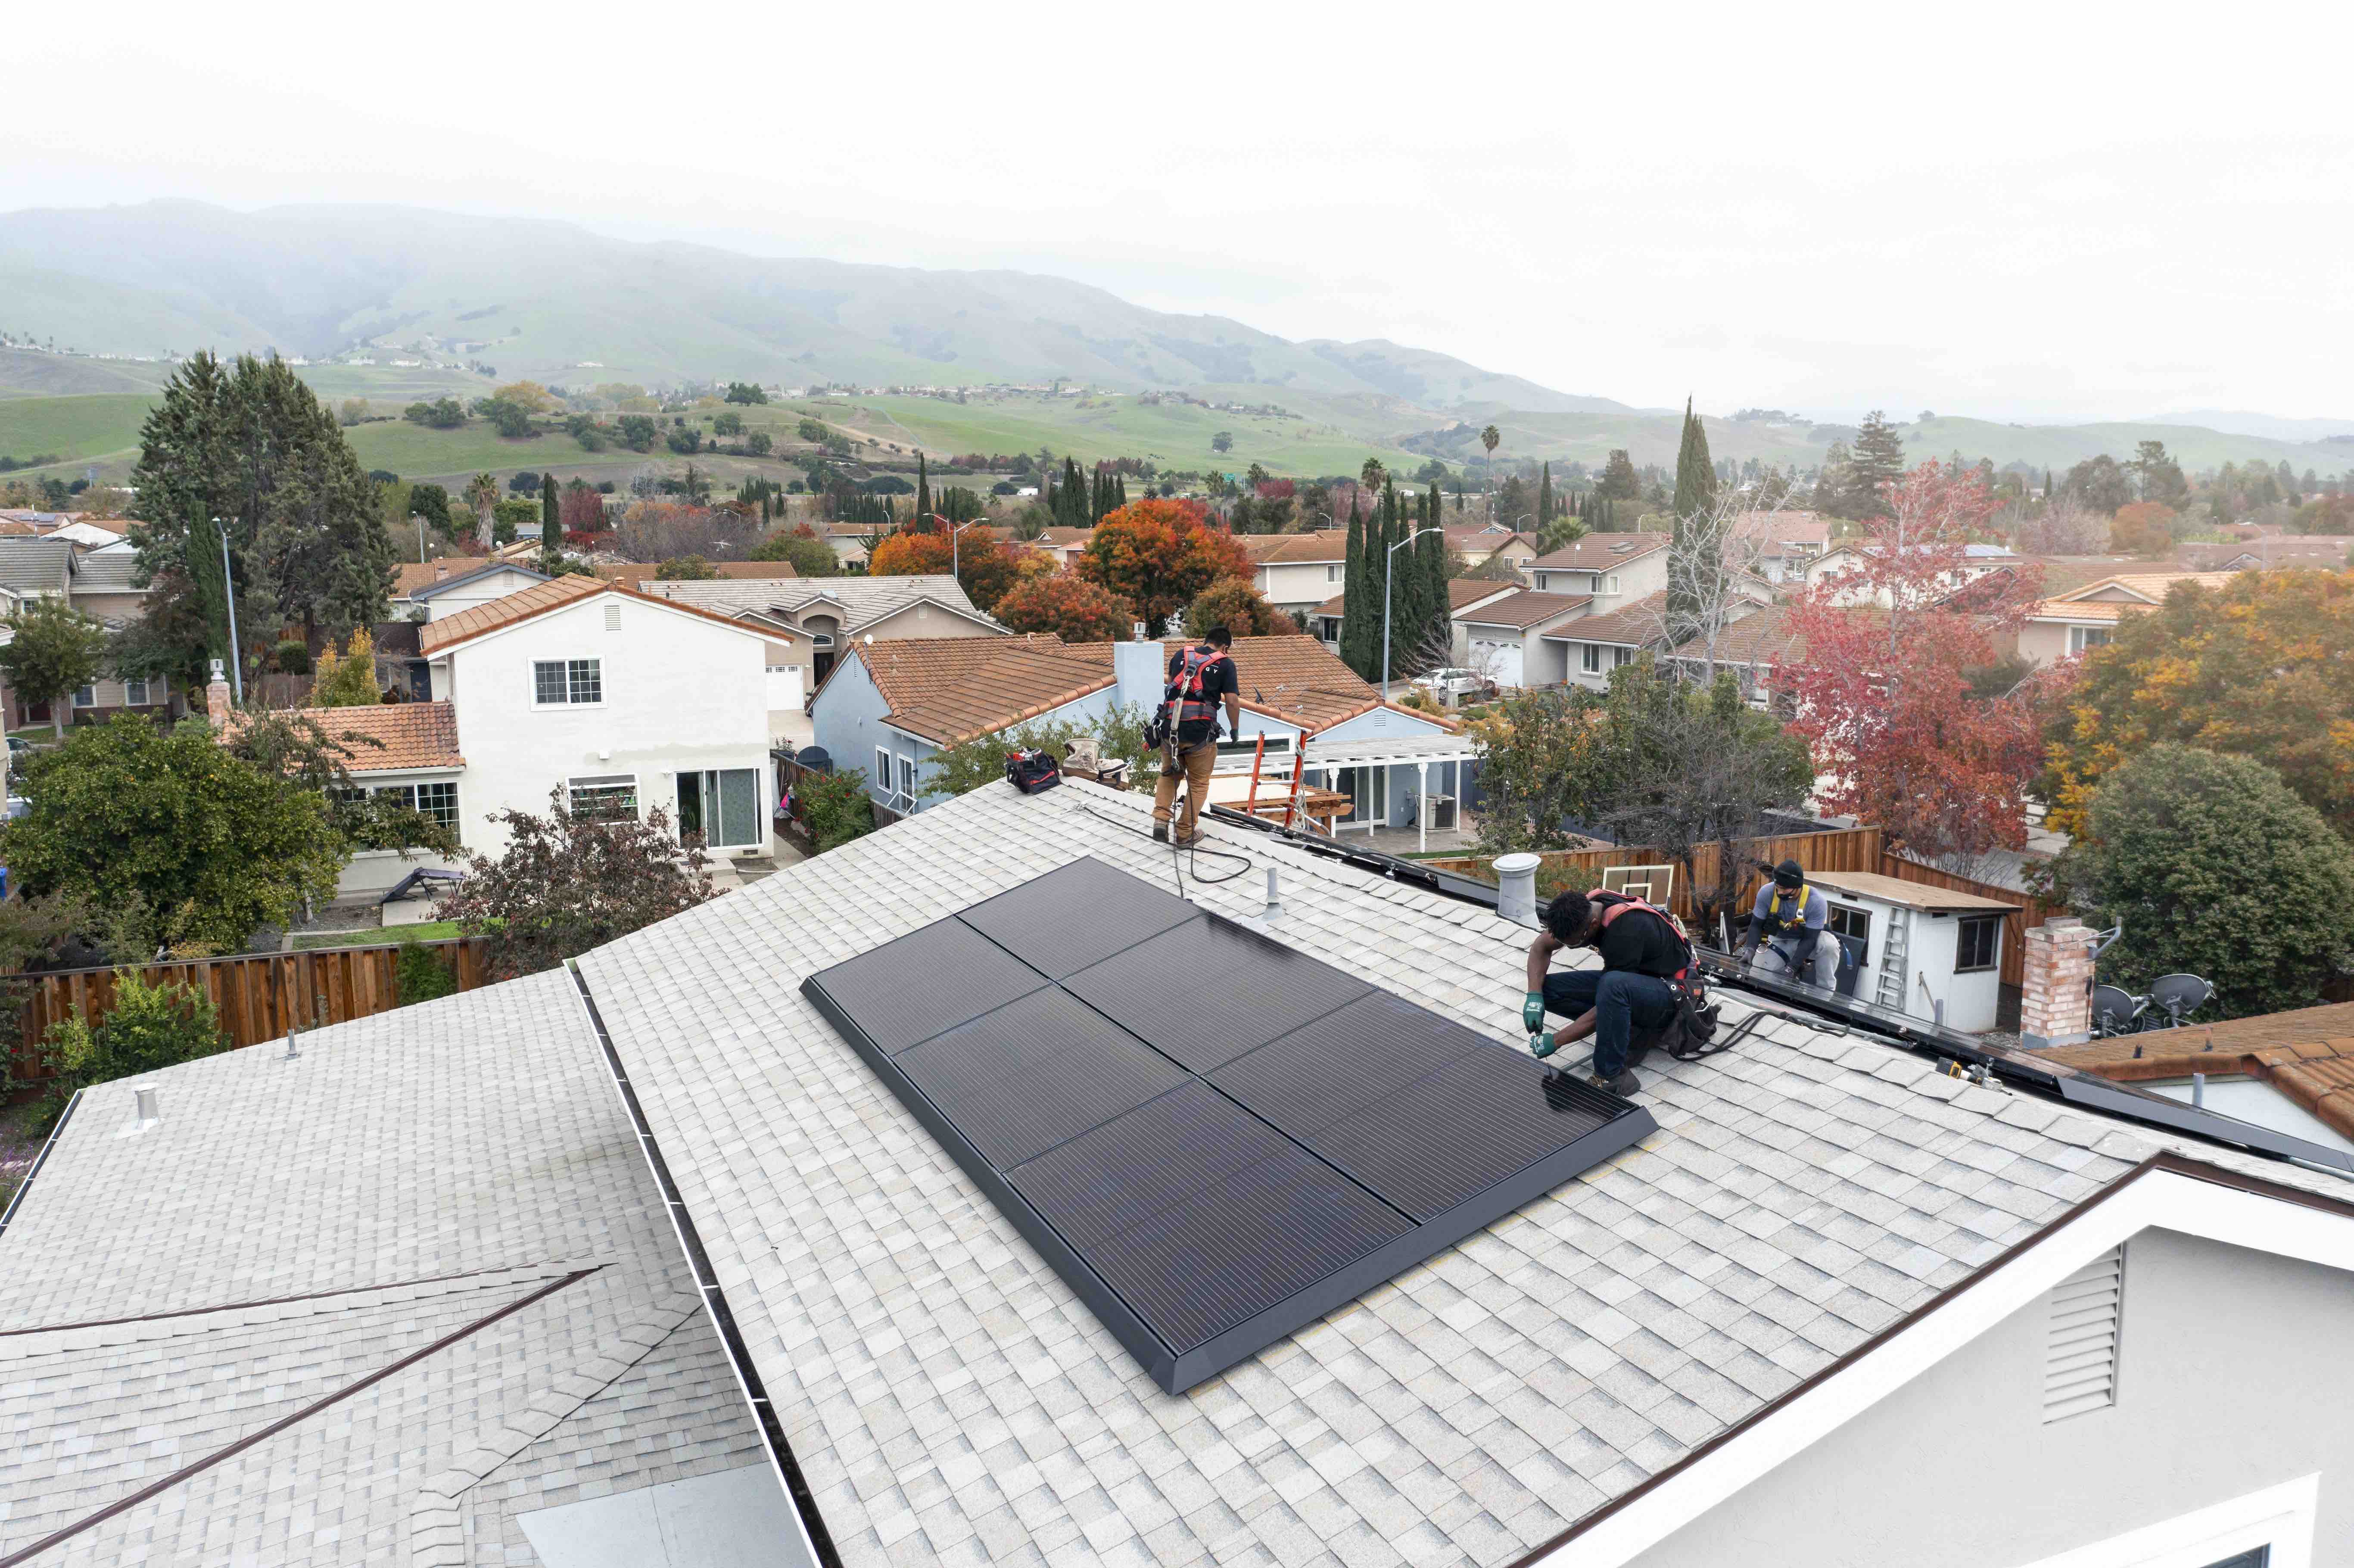 A 2-person Tesla crew on a roof finishing the solar installation